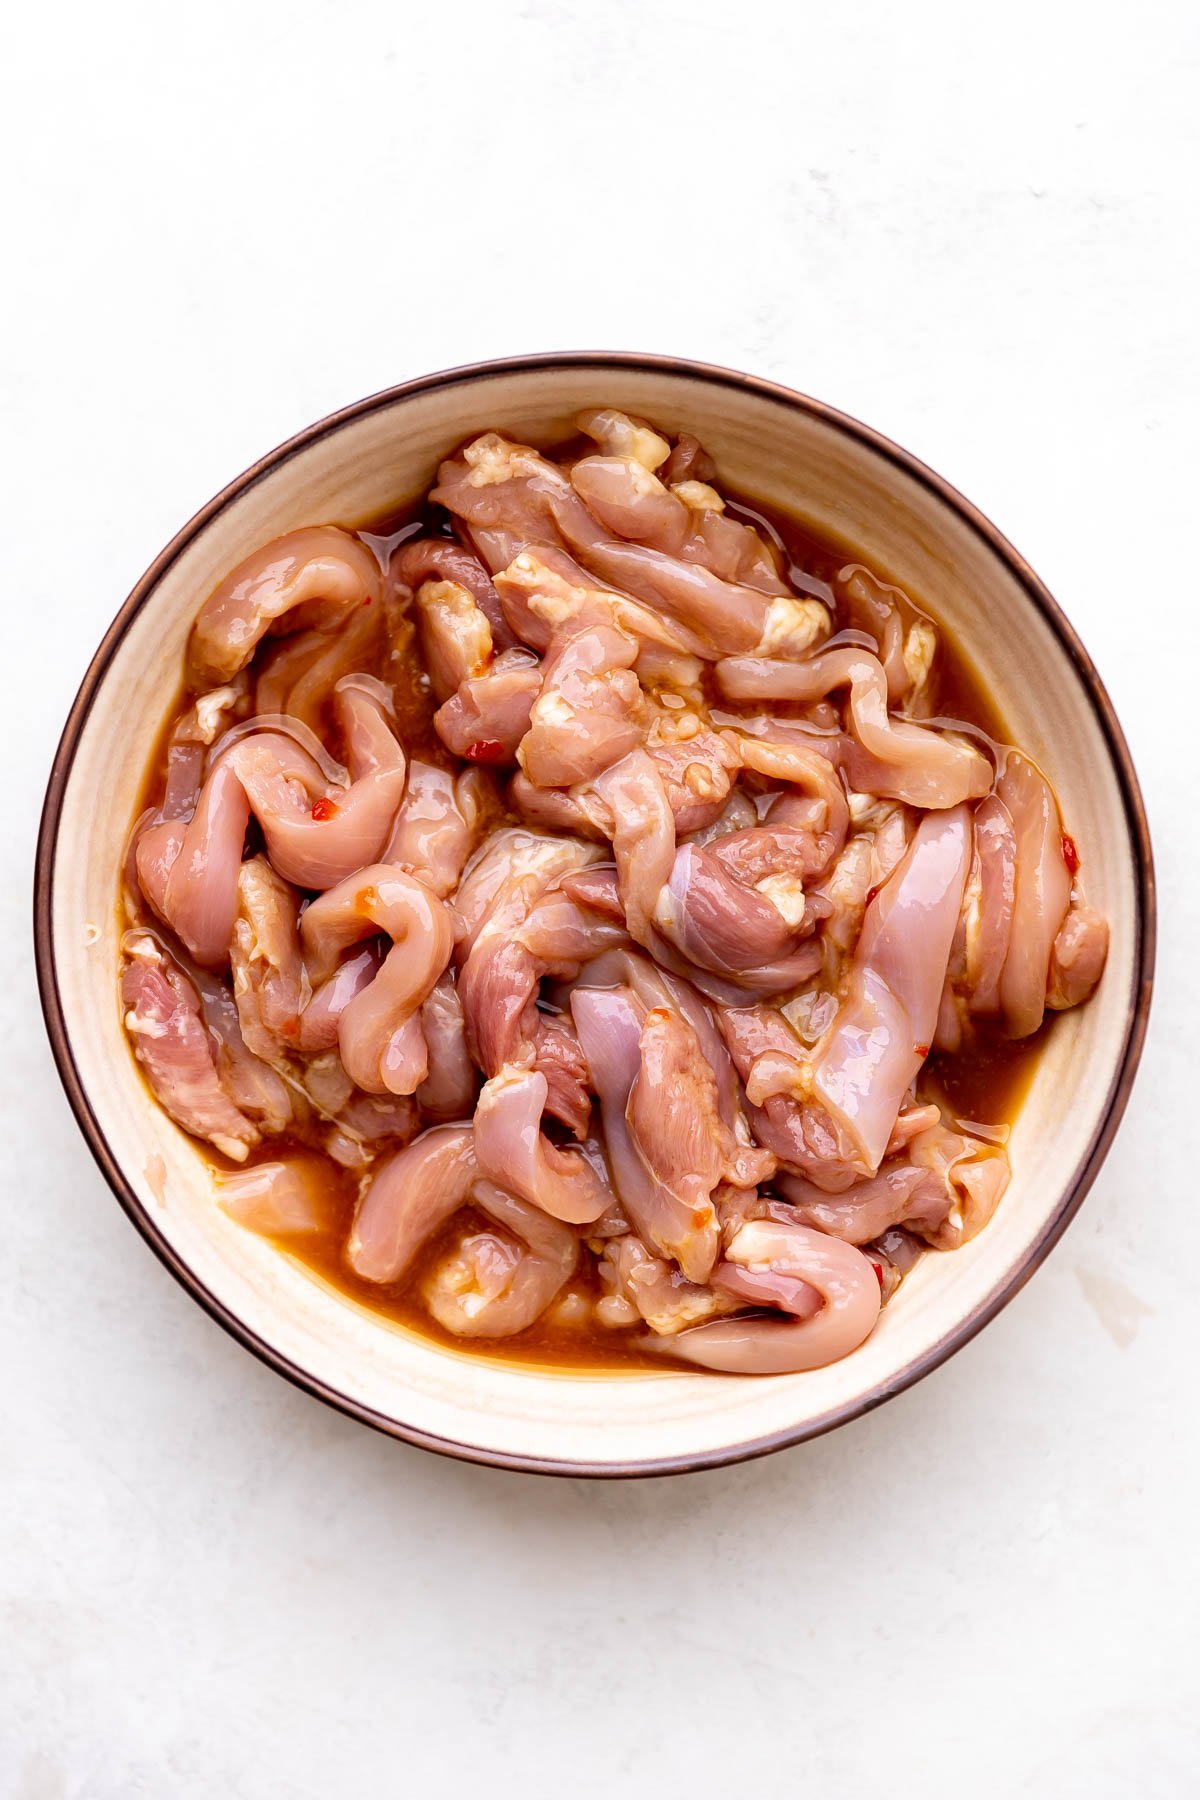 Thinly sliced chicken thighs marinate in a stir fry orange chicken marinade inside of a large ceramic bowl. The bowl sits atop a creamy white textured surface.